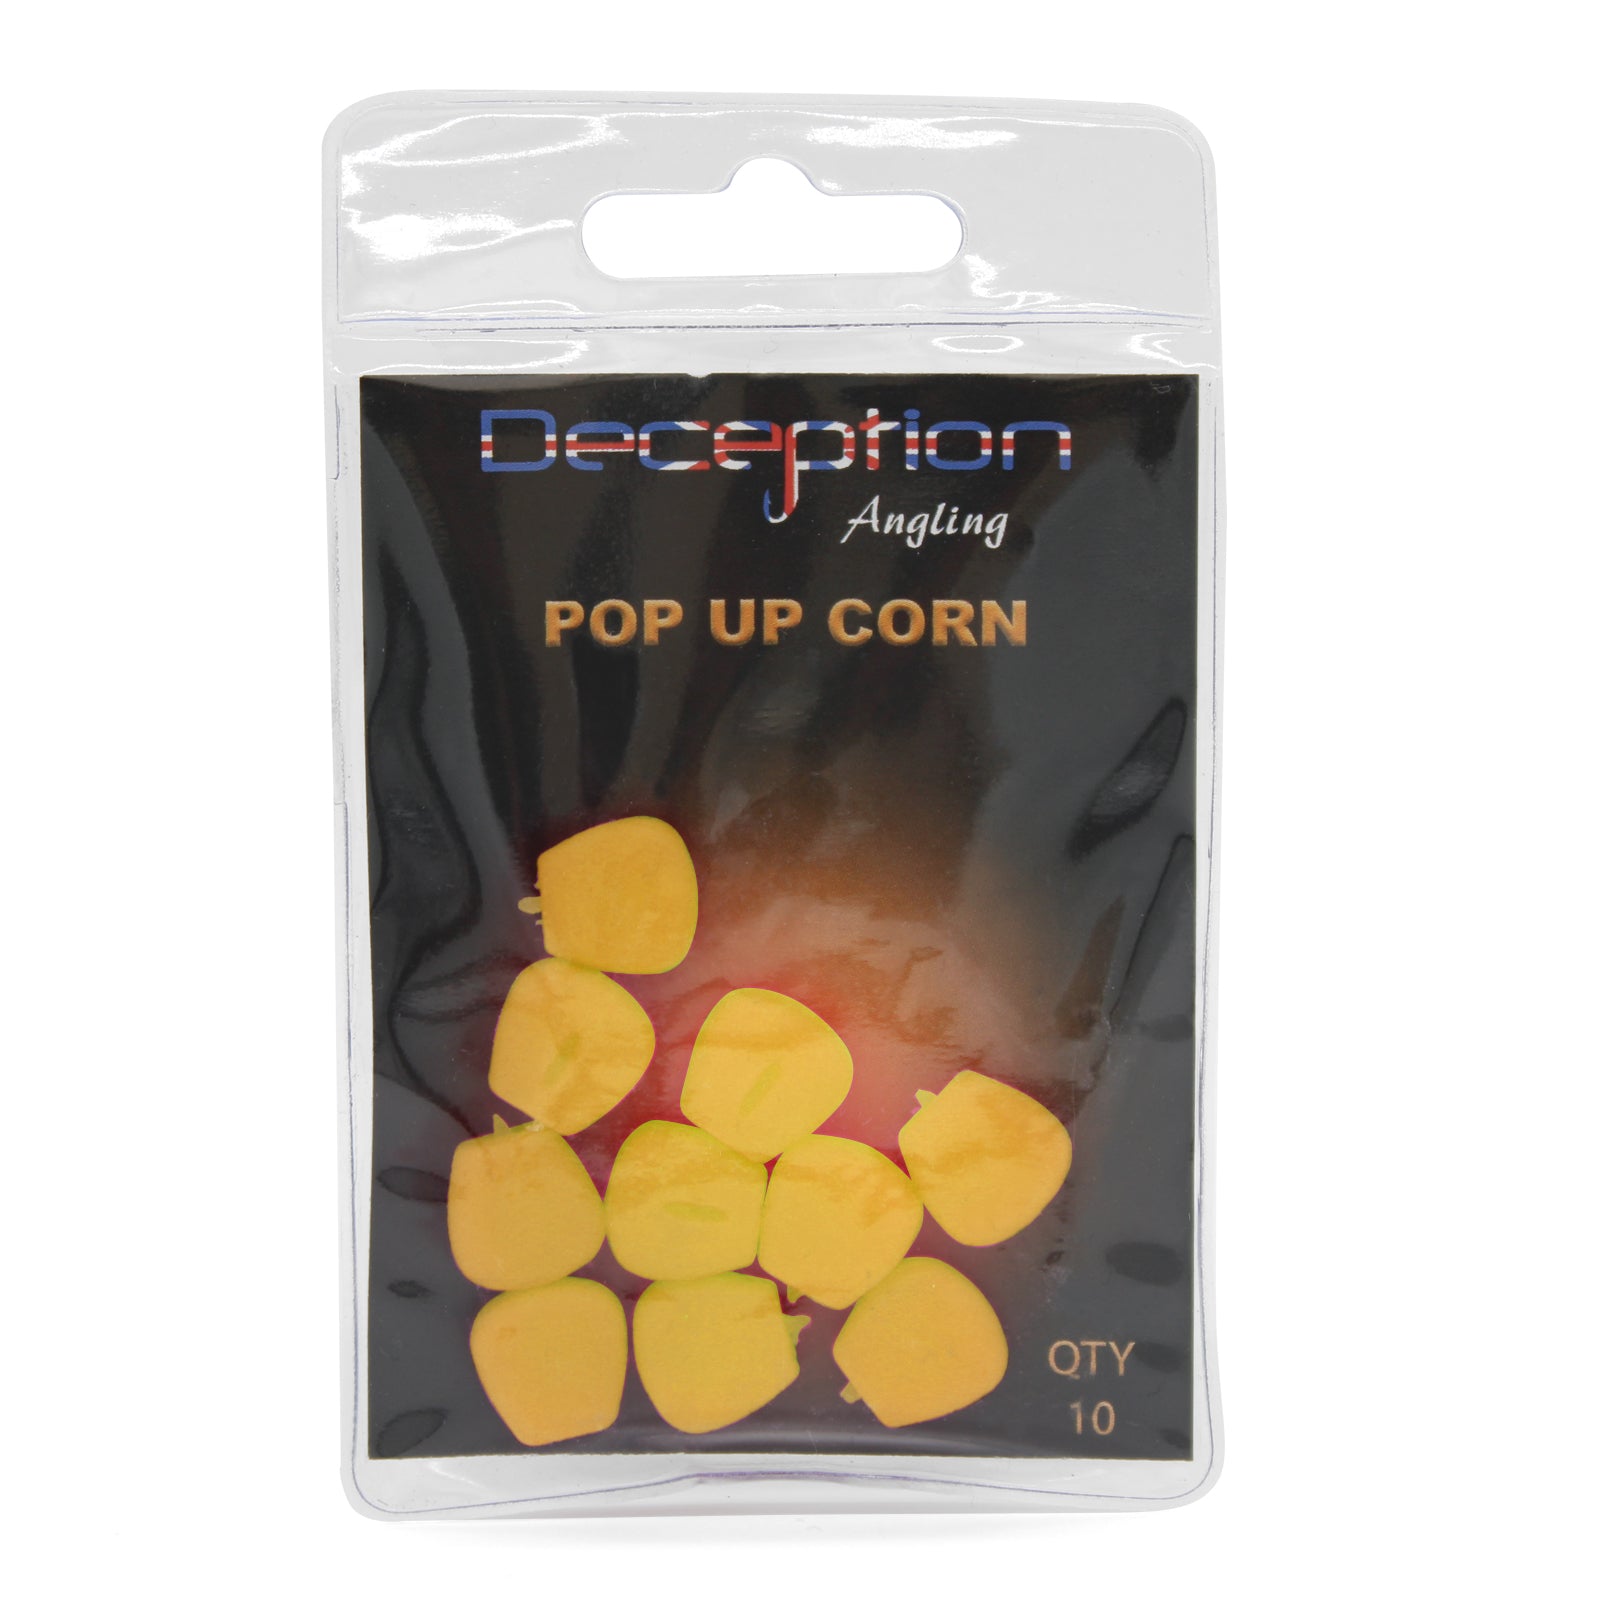 Deception Angling Pop Up Corn for Fishing in Yellow